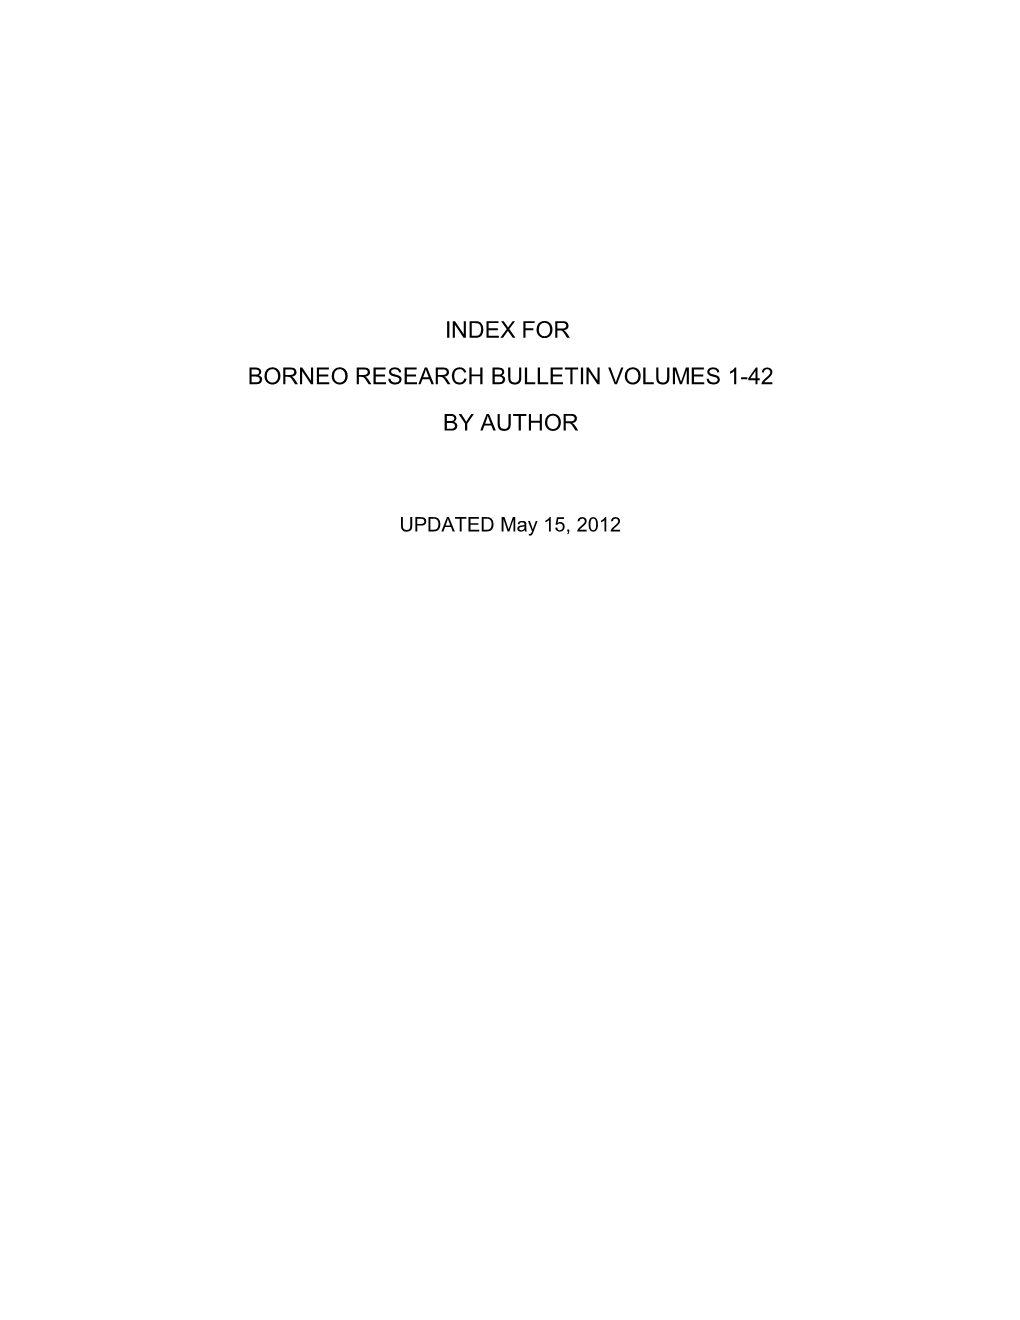 Index for Borneo Research Bulletin Volumes 1-42 by Author